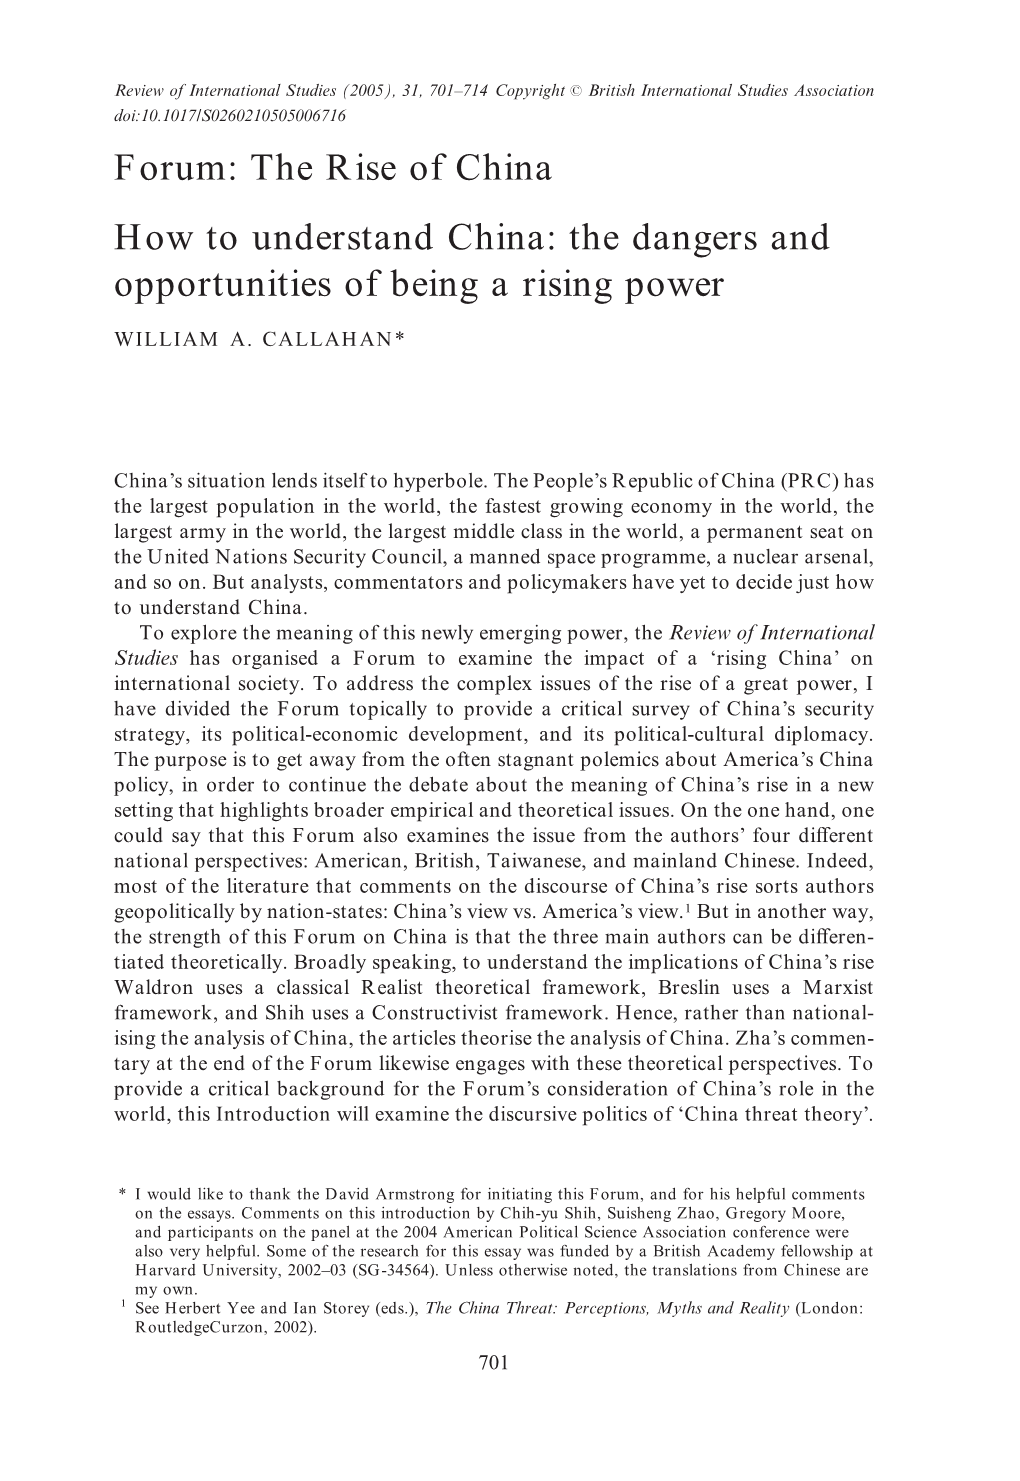 The Rise of China How to Understand China: the Dangers and Opportunities of Being a Rising Power